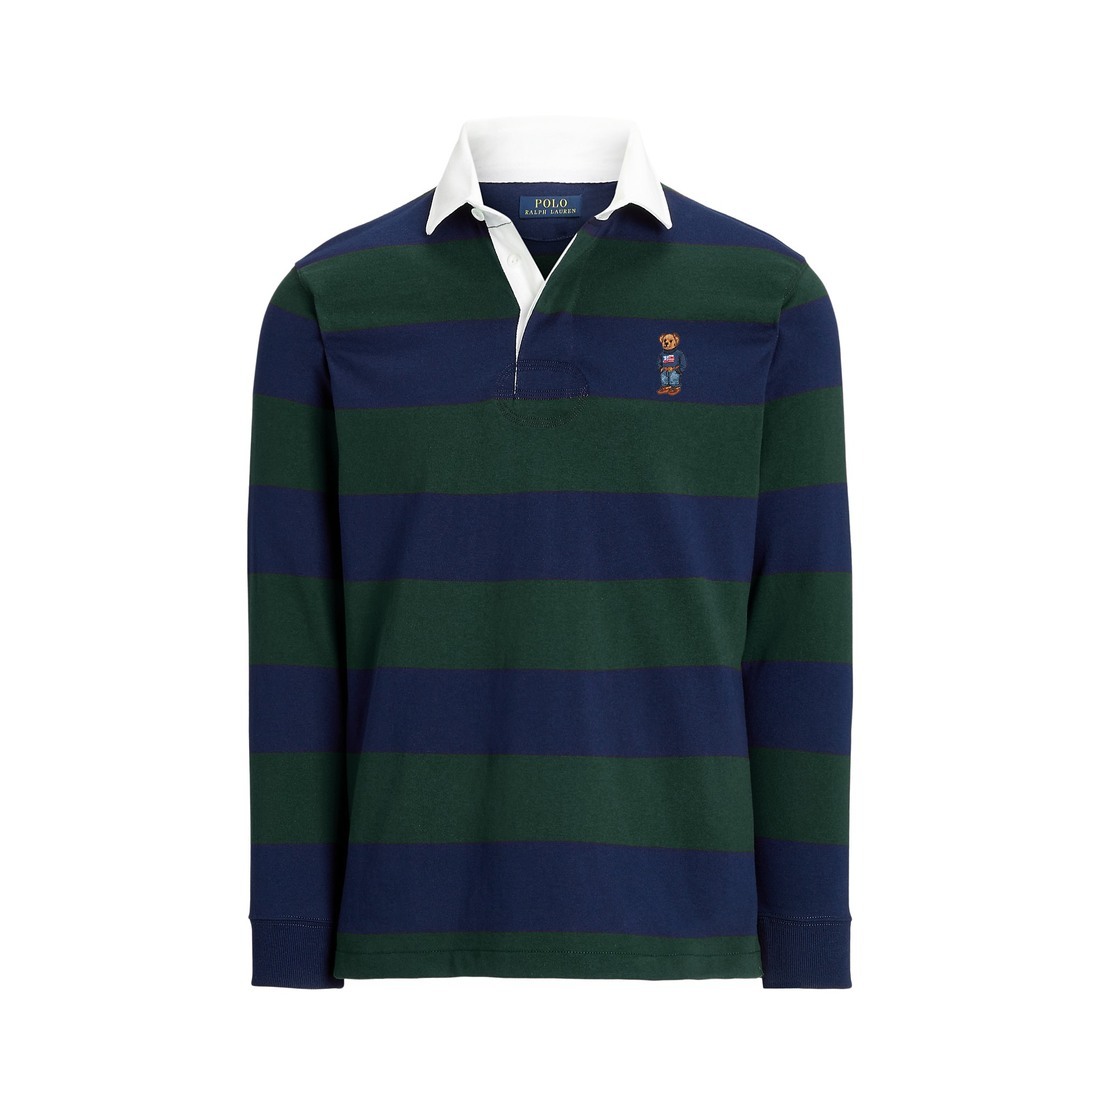 Are Ralph Lauren Polos Worth It? Iconic Preppy Shirt Review 